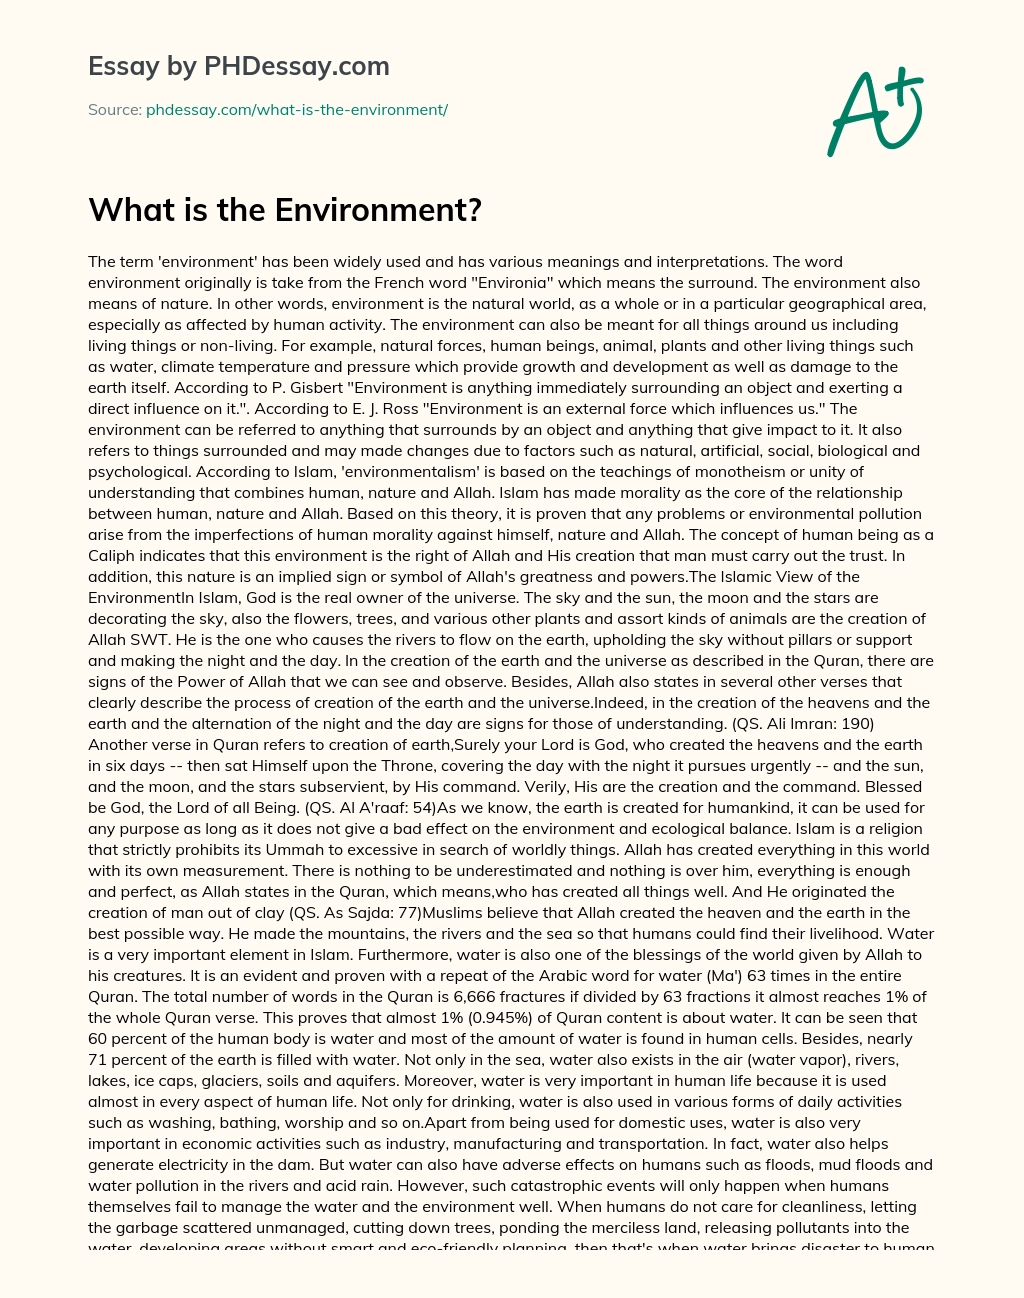 What is the Environment essay